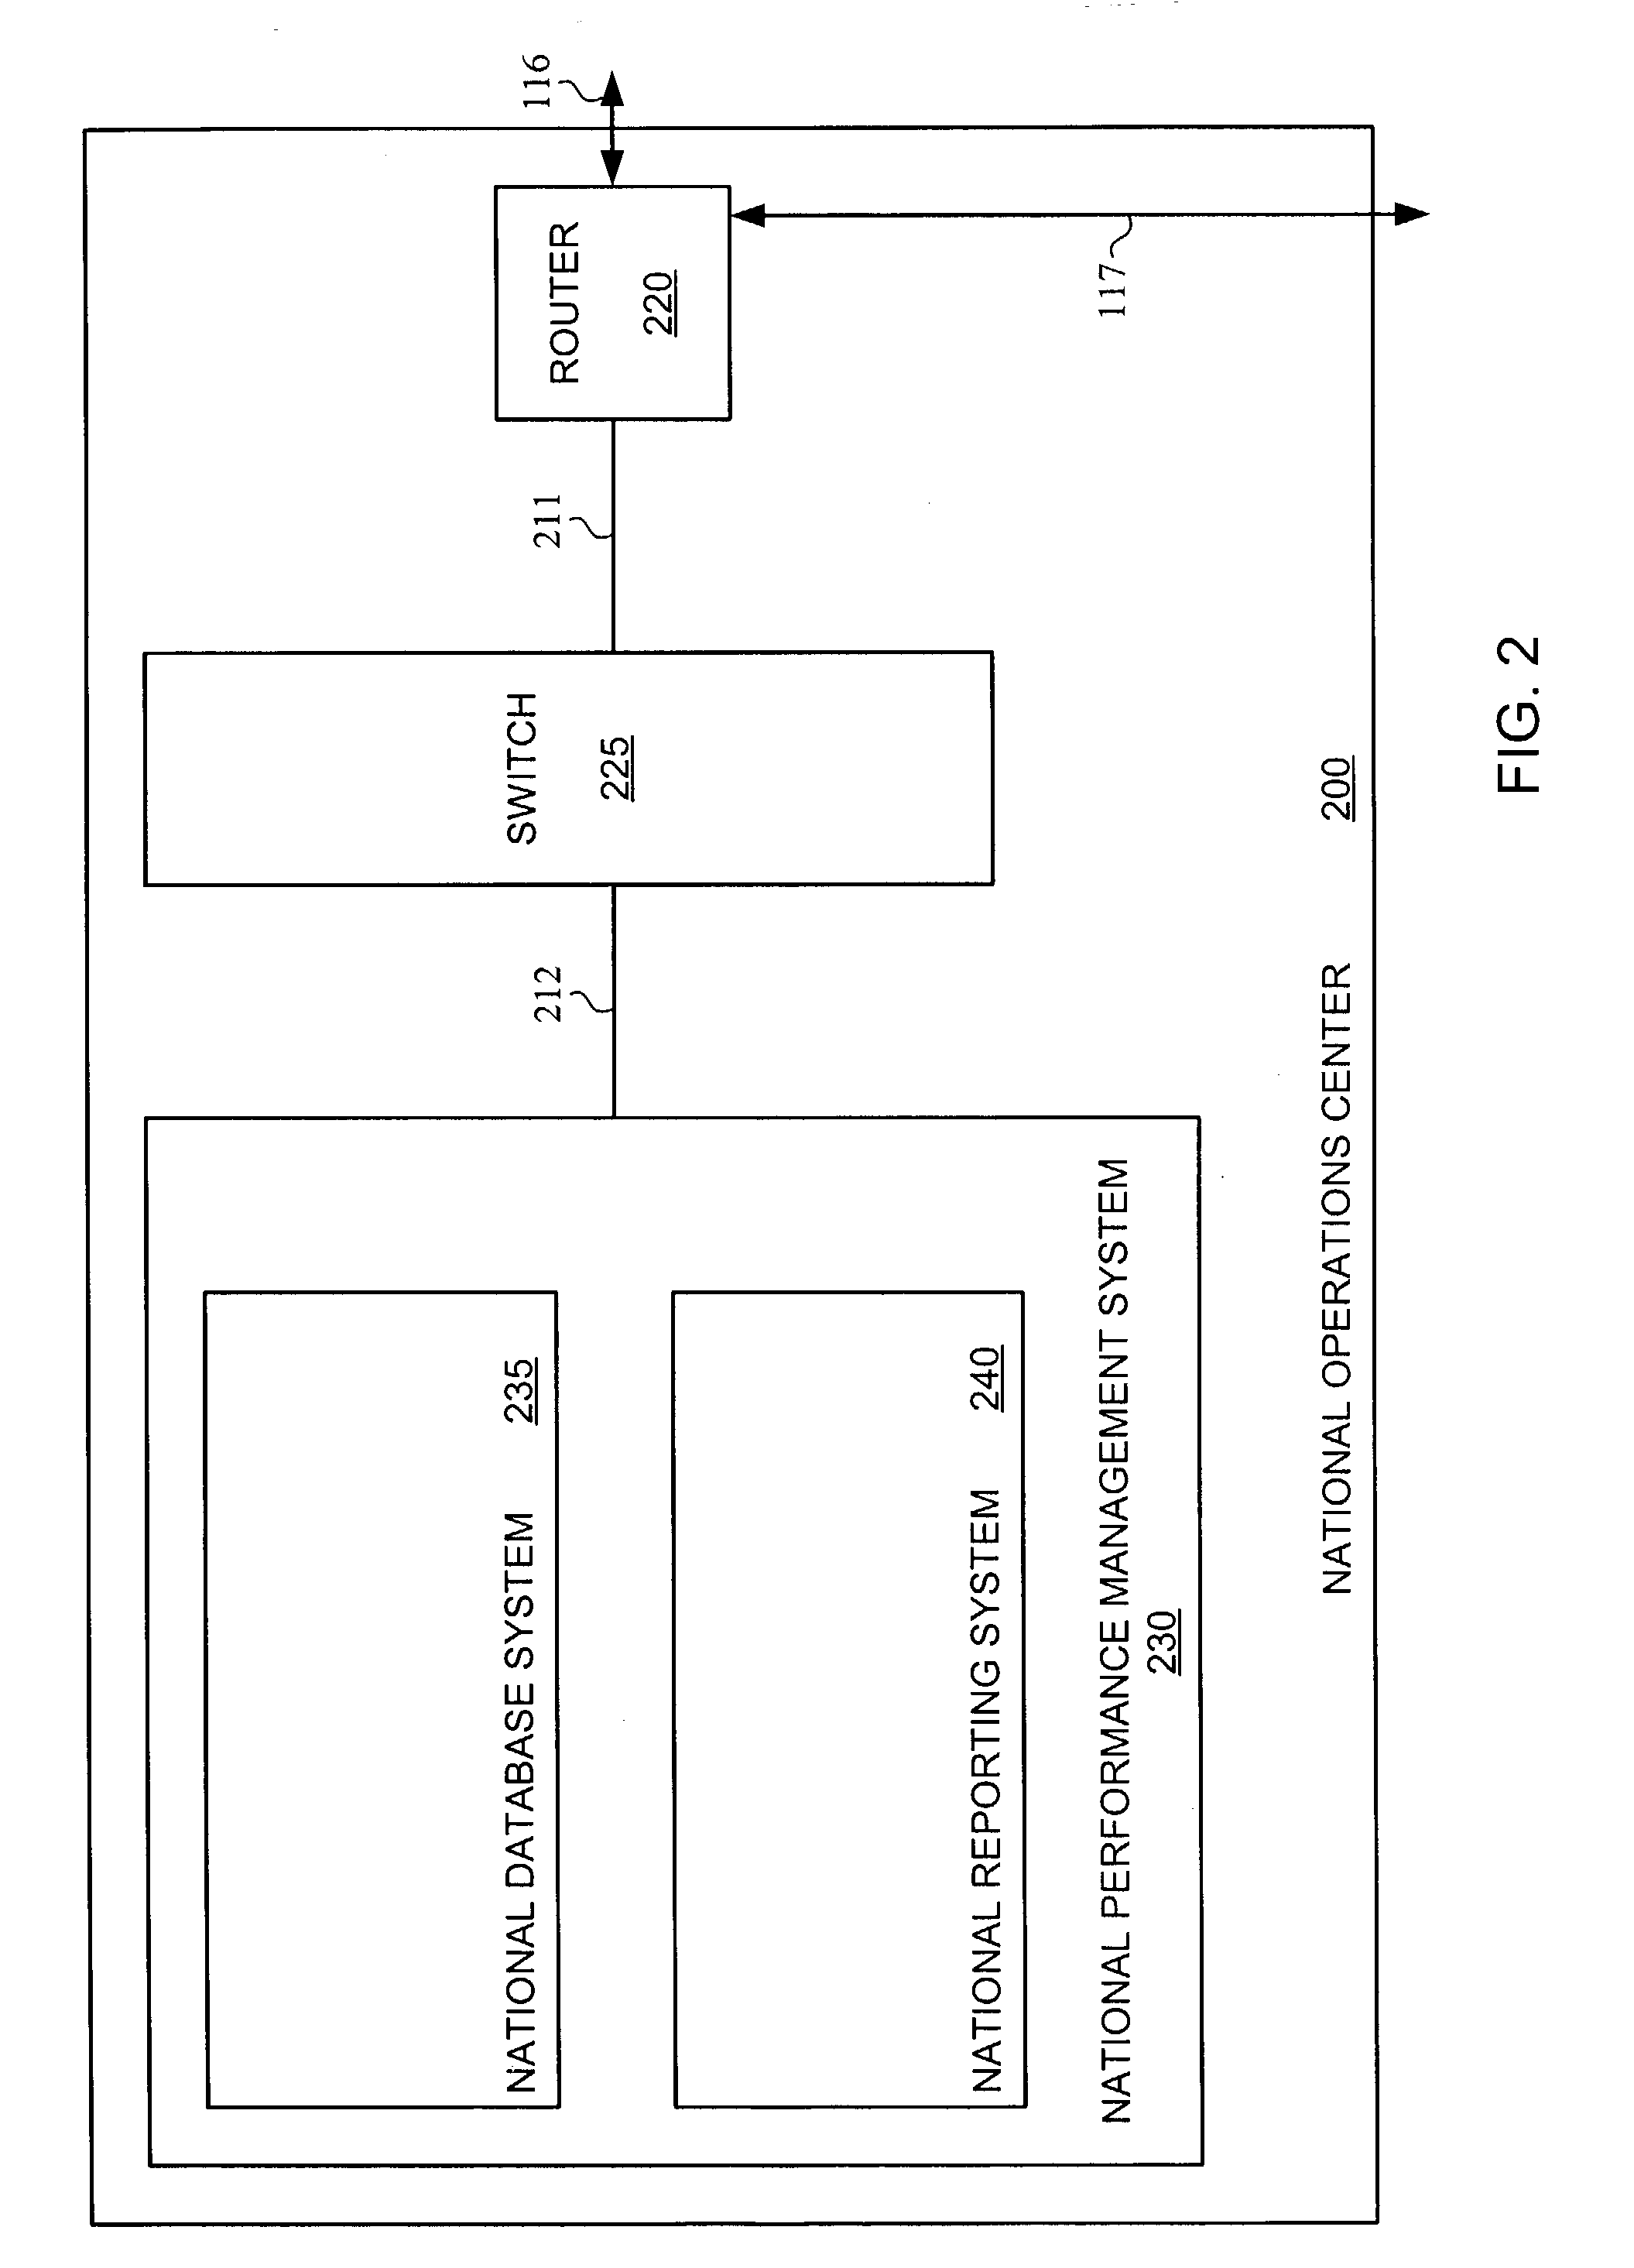 Configuration of wireless control systems for broadband wireless communications